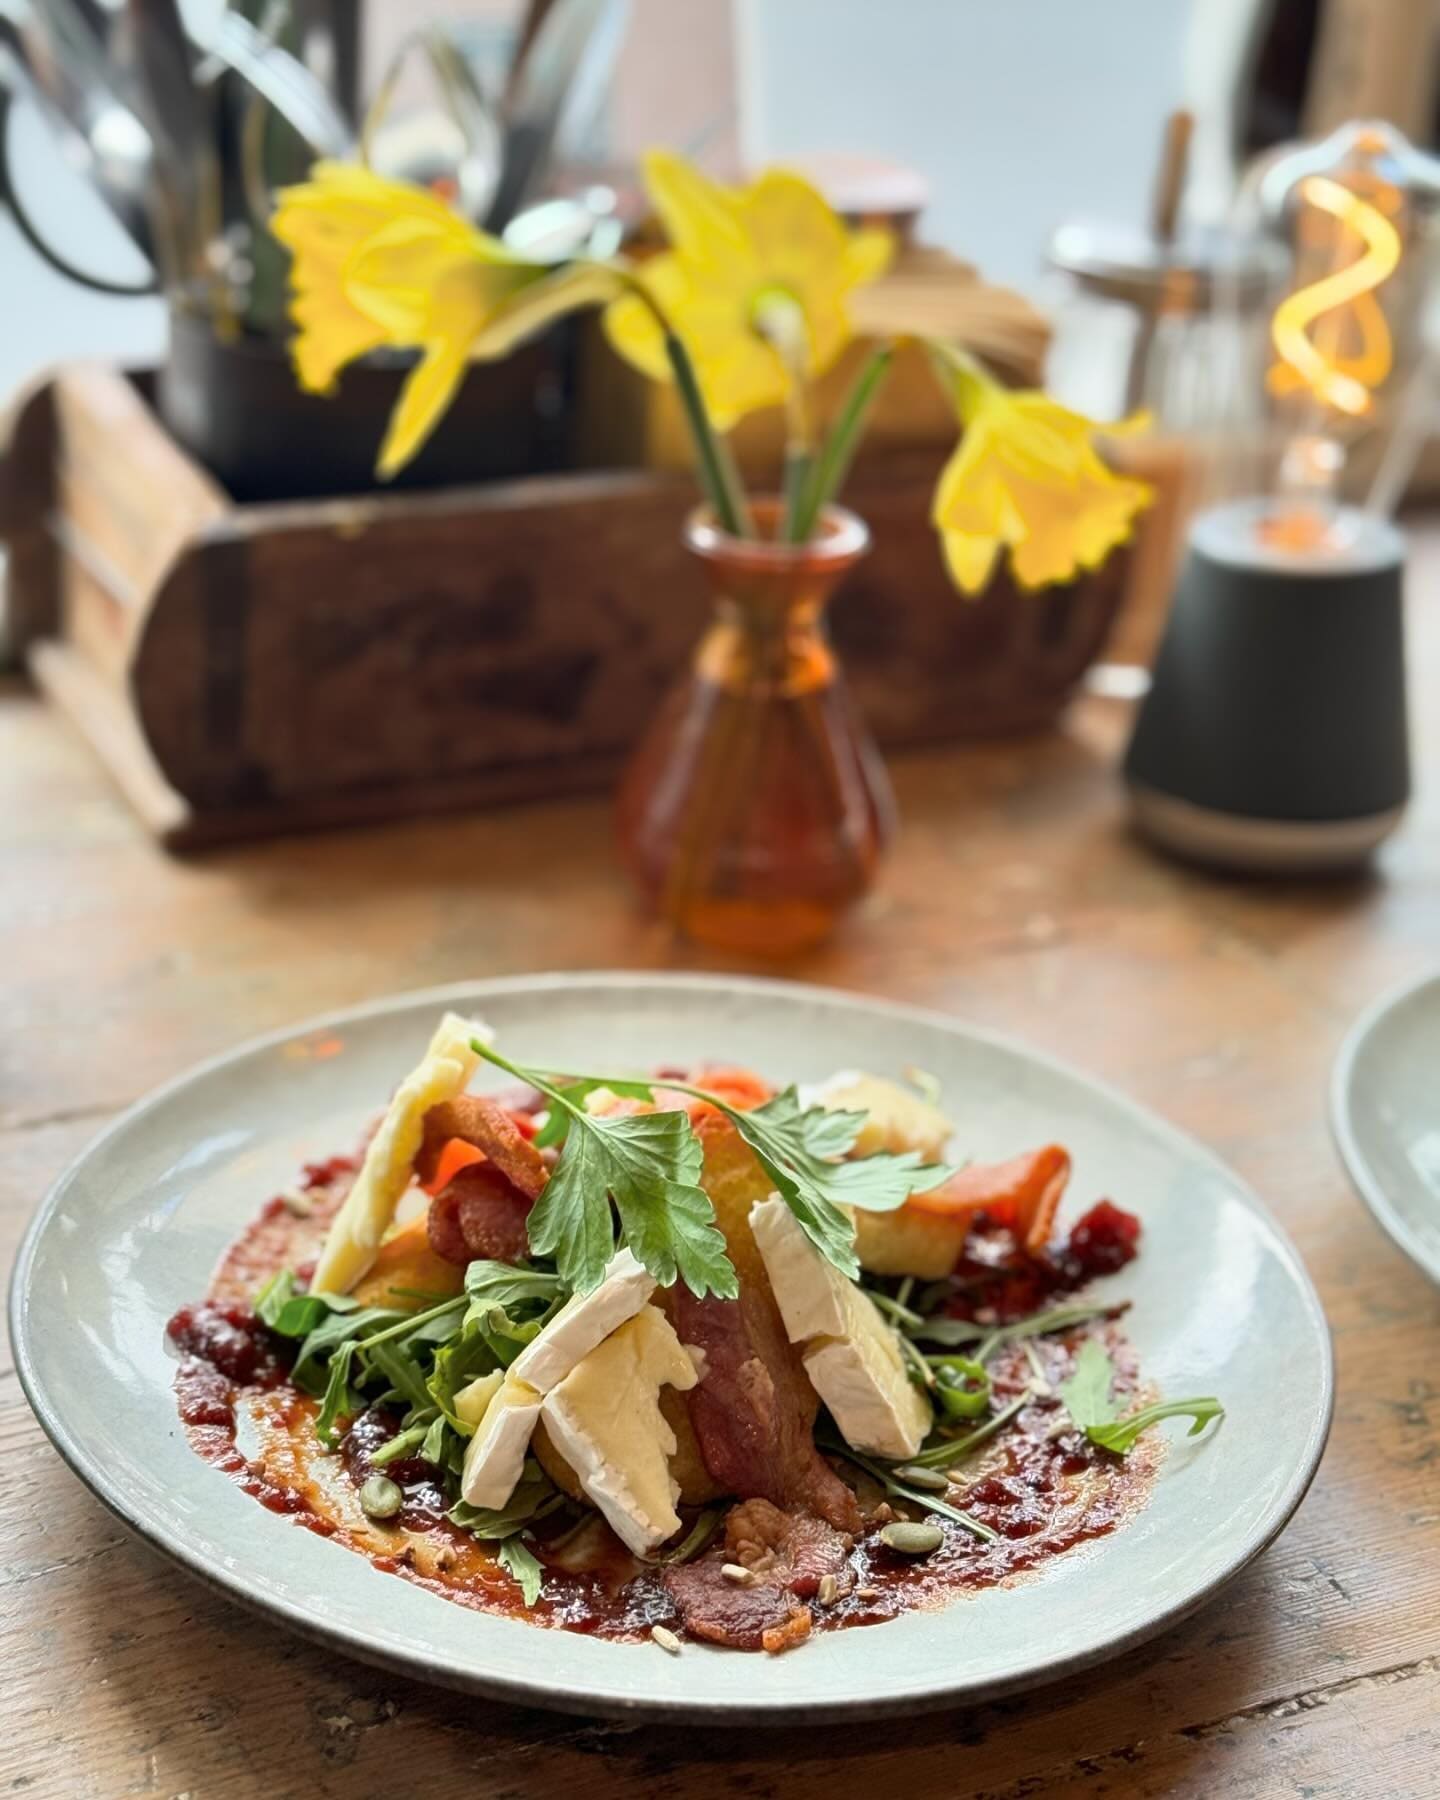 Food and flowers line the table at Cosy Cafe, Hay-on-Wye